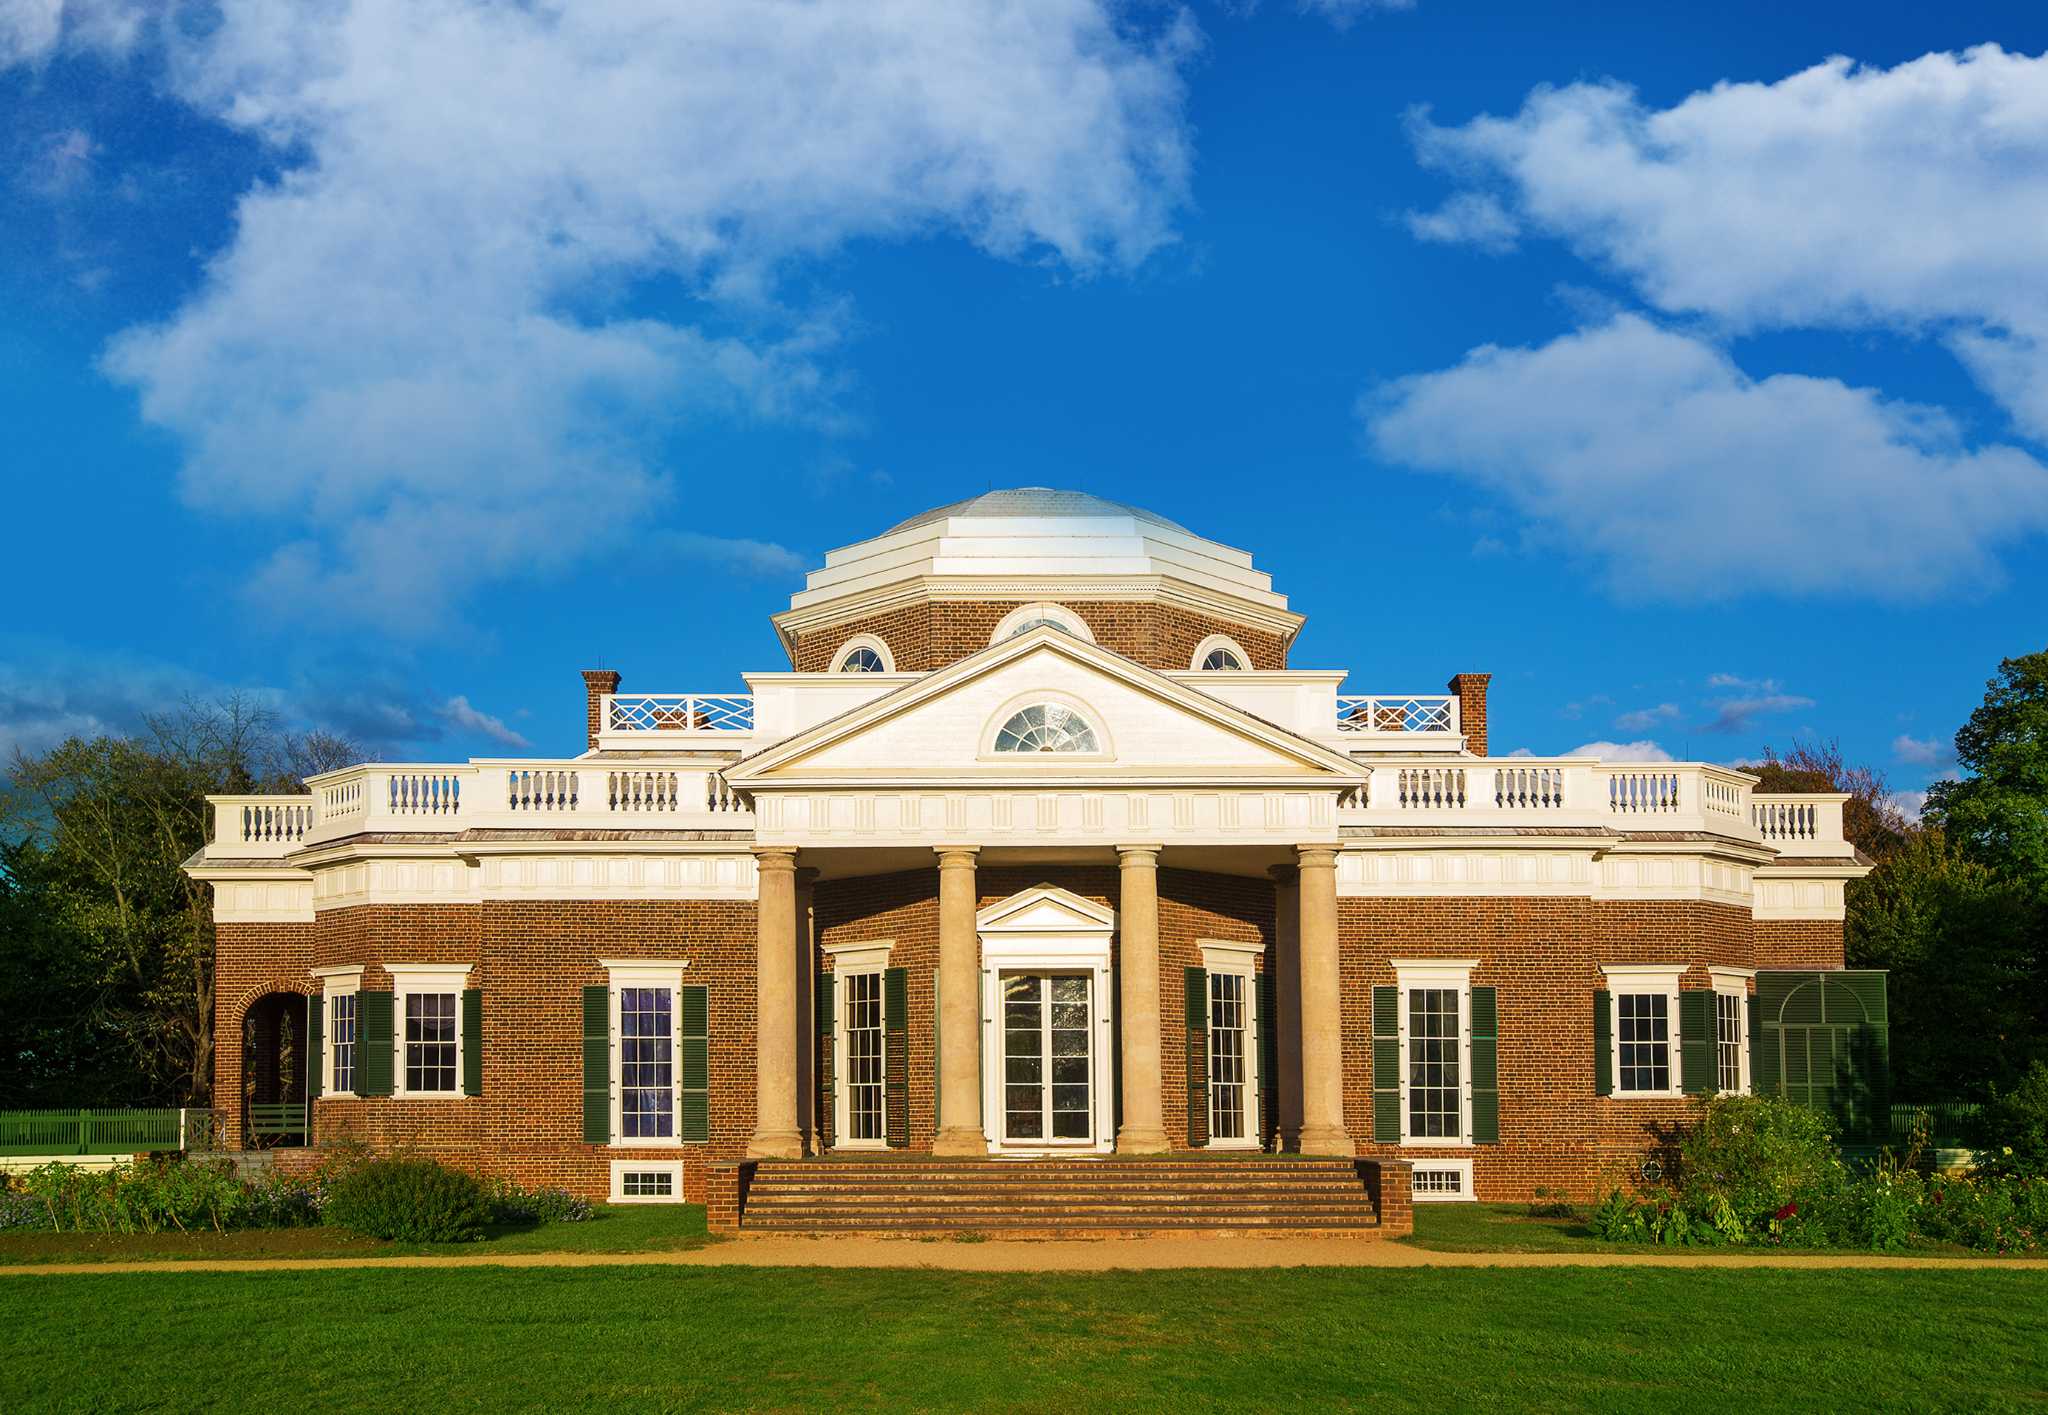 Jefferson's Monticello finally gives Sally Hemings her place in presidential history ...